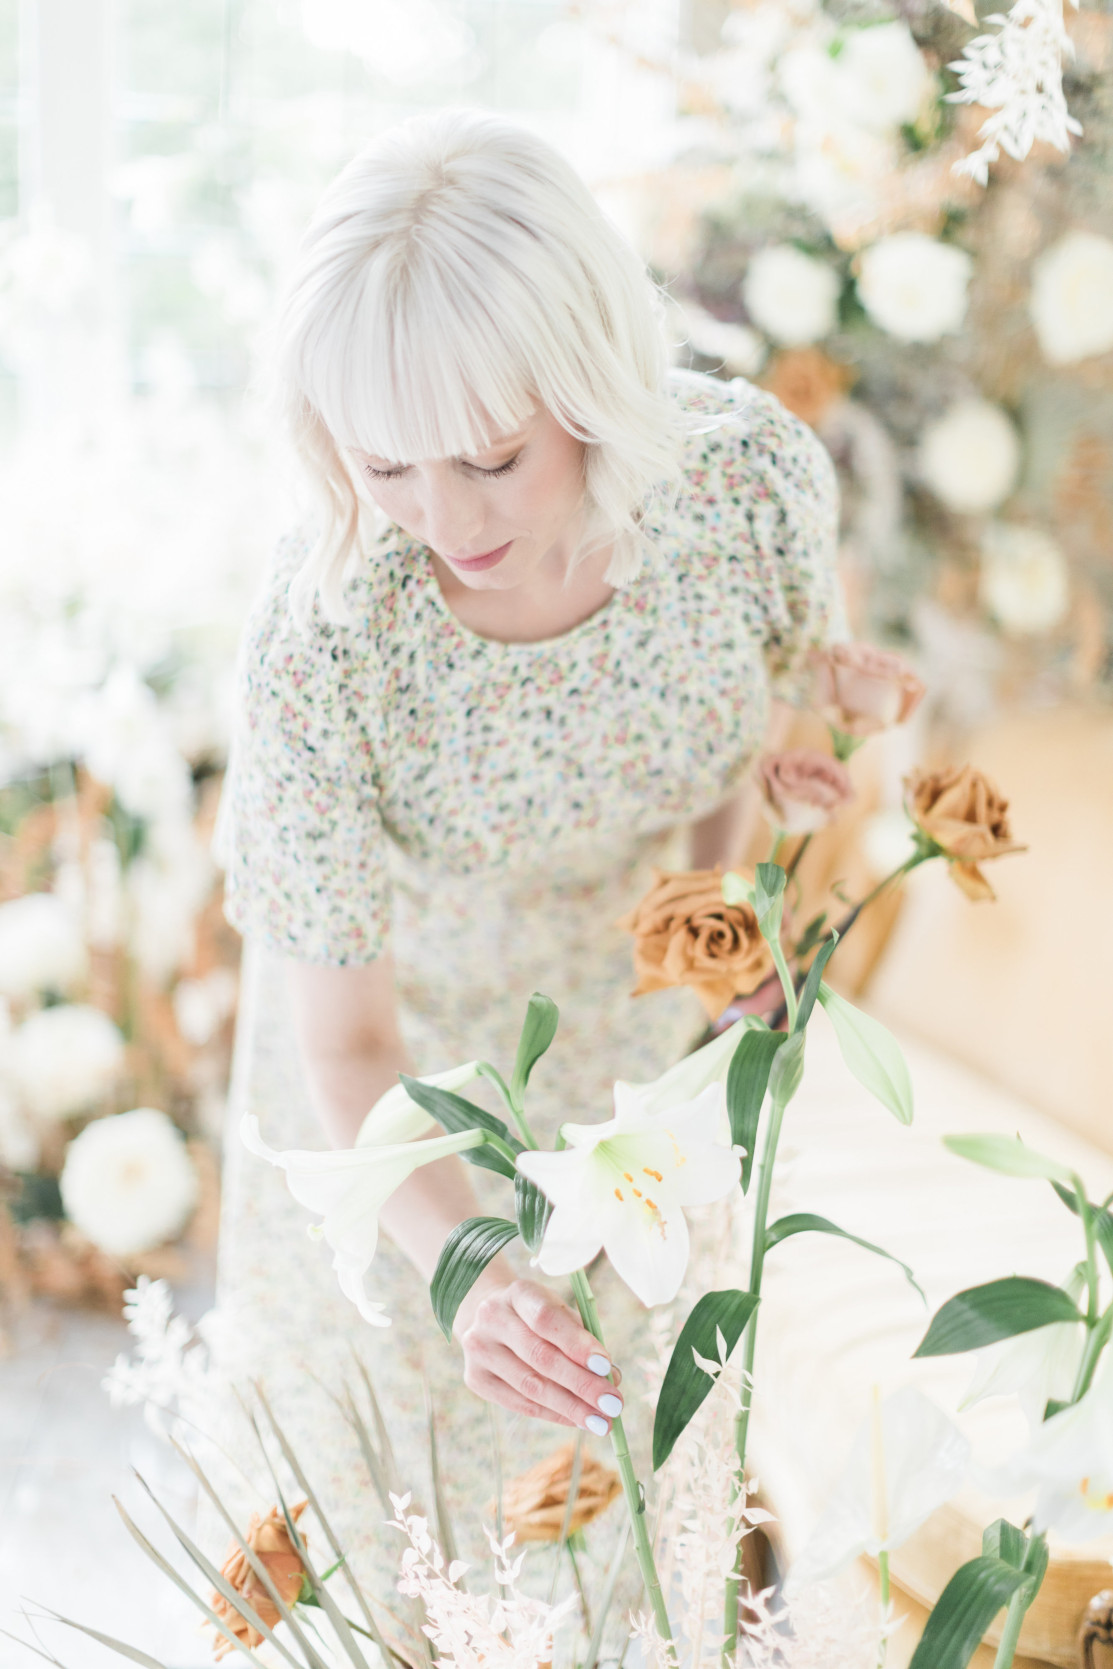 Autumn Keller who is the owner of Isibeal Studio arranges flowers.